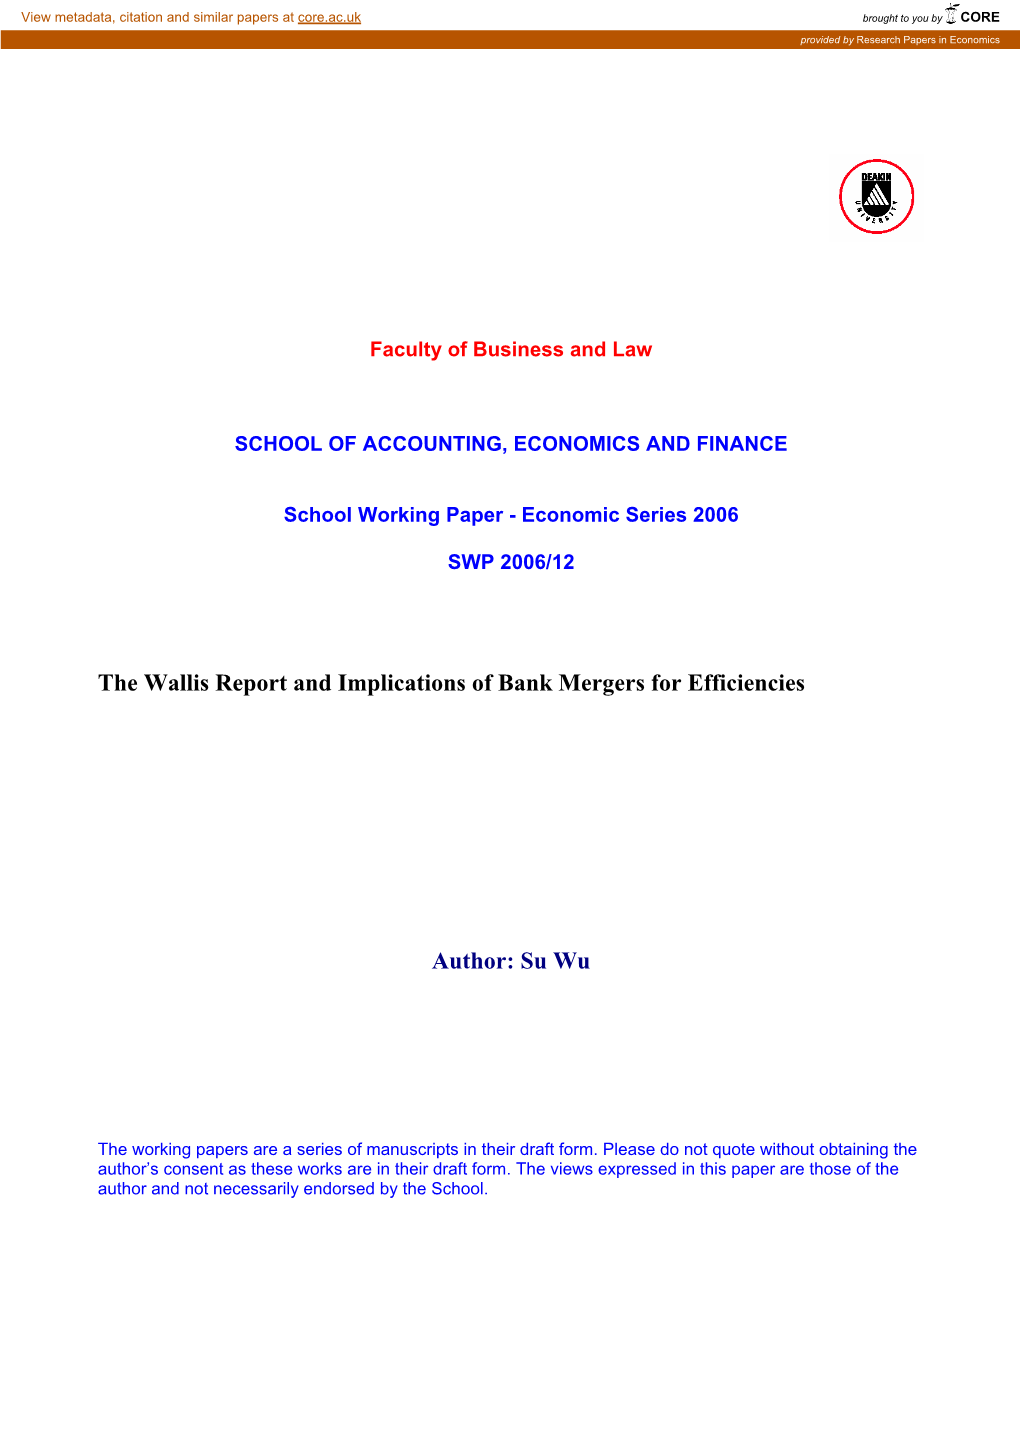 The Wallis Report and Implications of Bank Mergers for Efficiencies